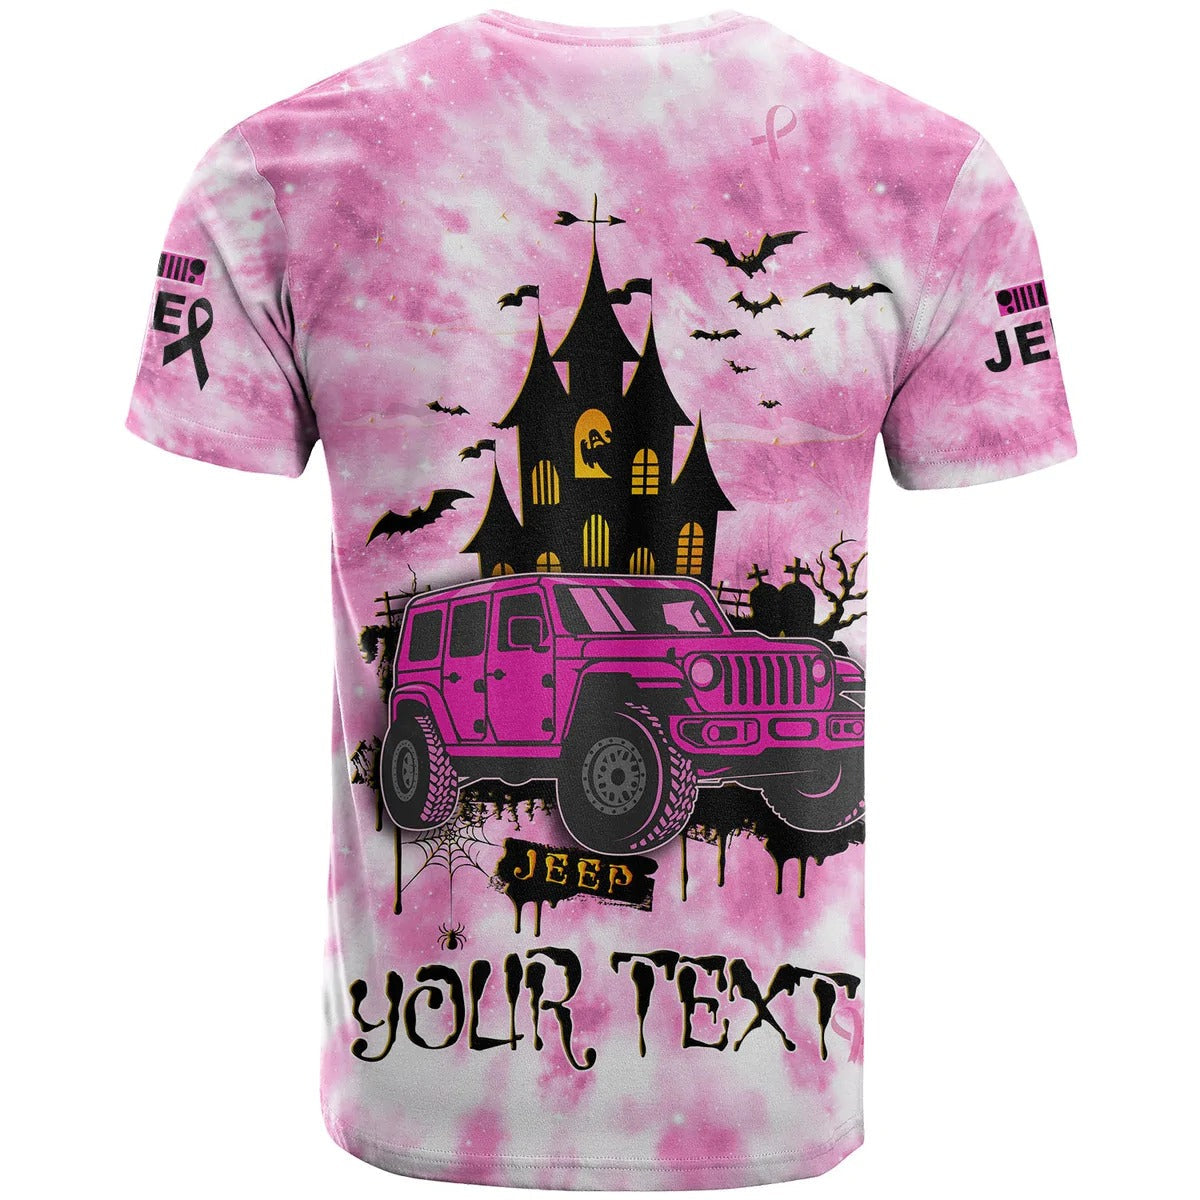 JEE Car Breast Cancer Shirt. T Shirt Tie Dye Halloween In October We Wear Pink